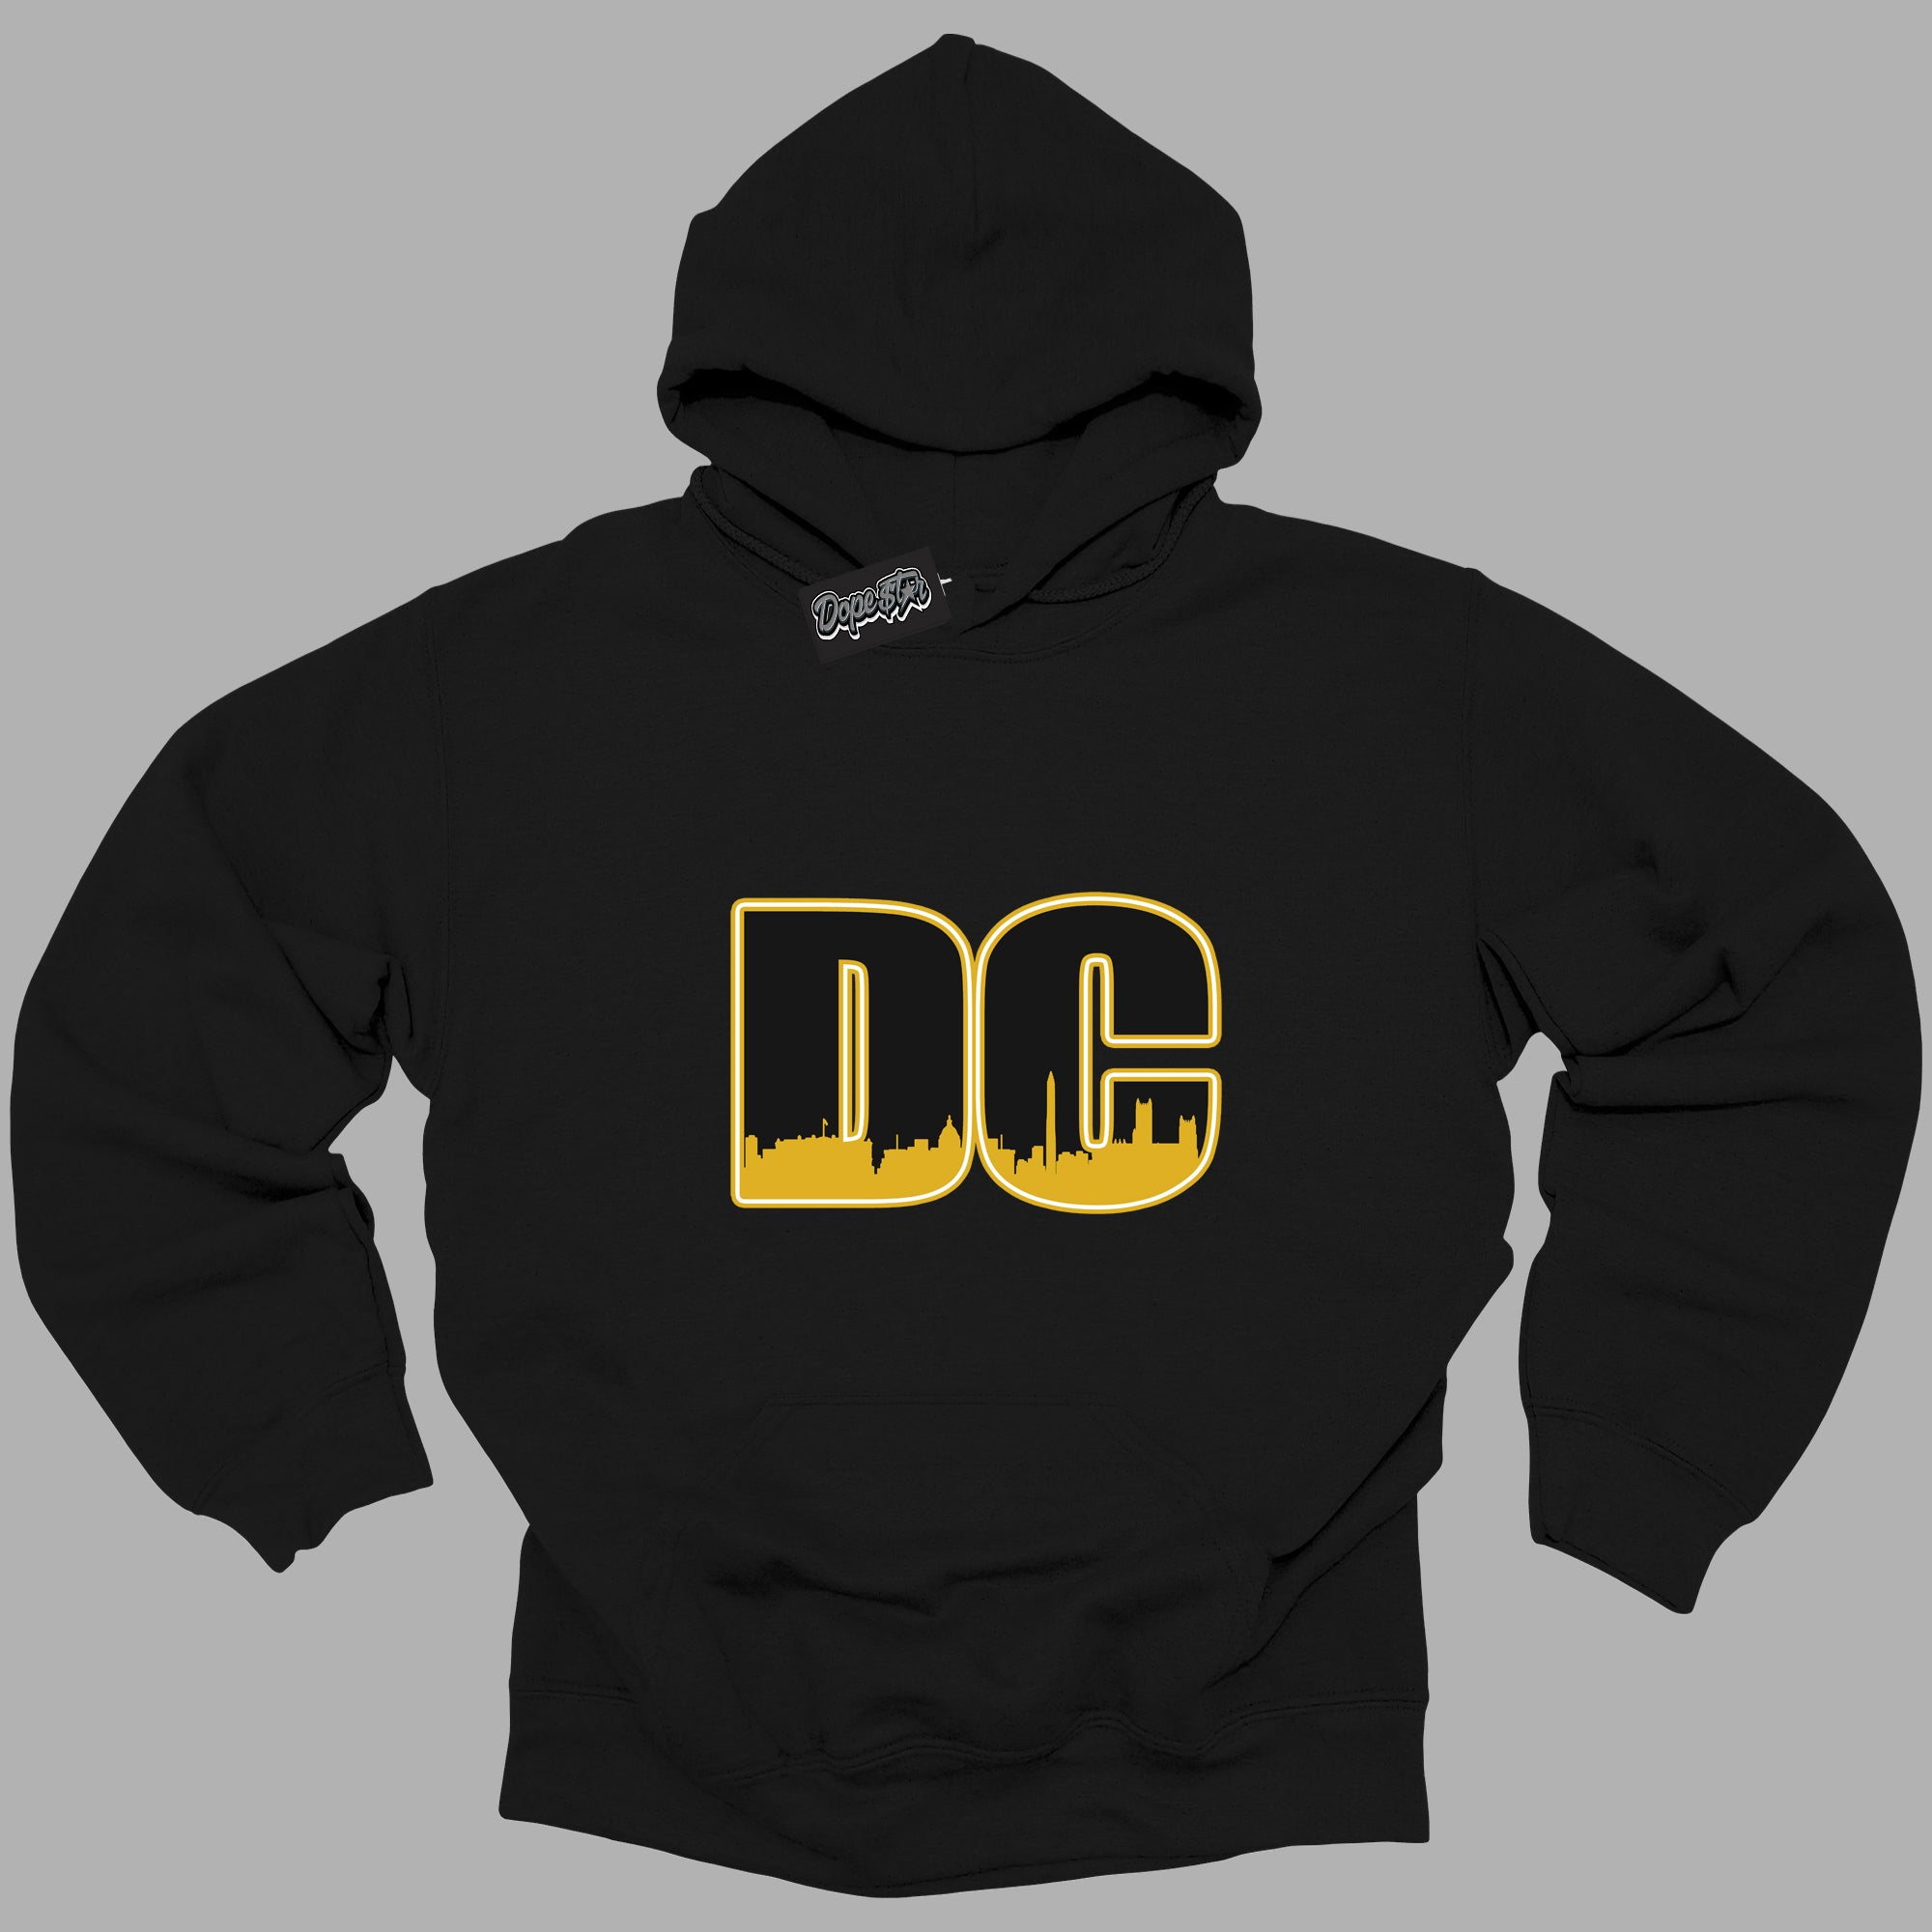 Cool Black Hoodie with “ DC ”  design that Perfectly Matches Yellow Ochre 6s Sneakers.